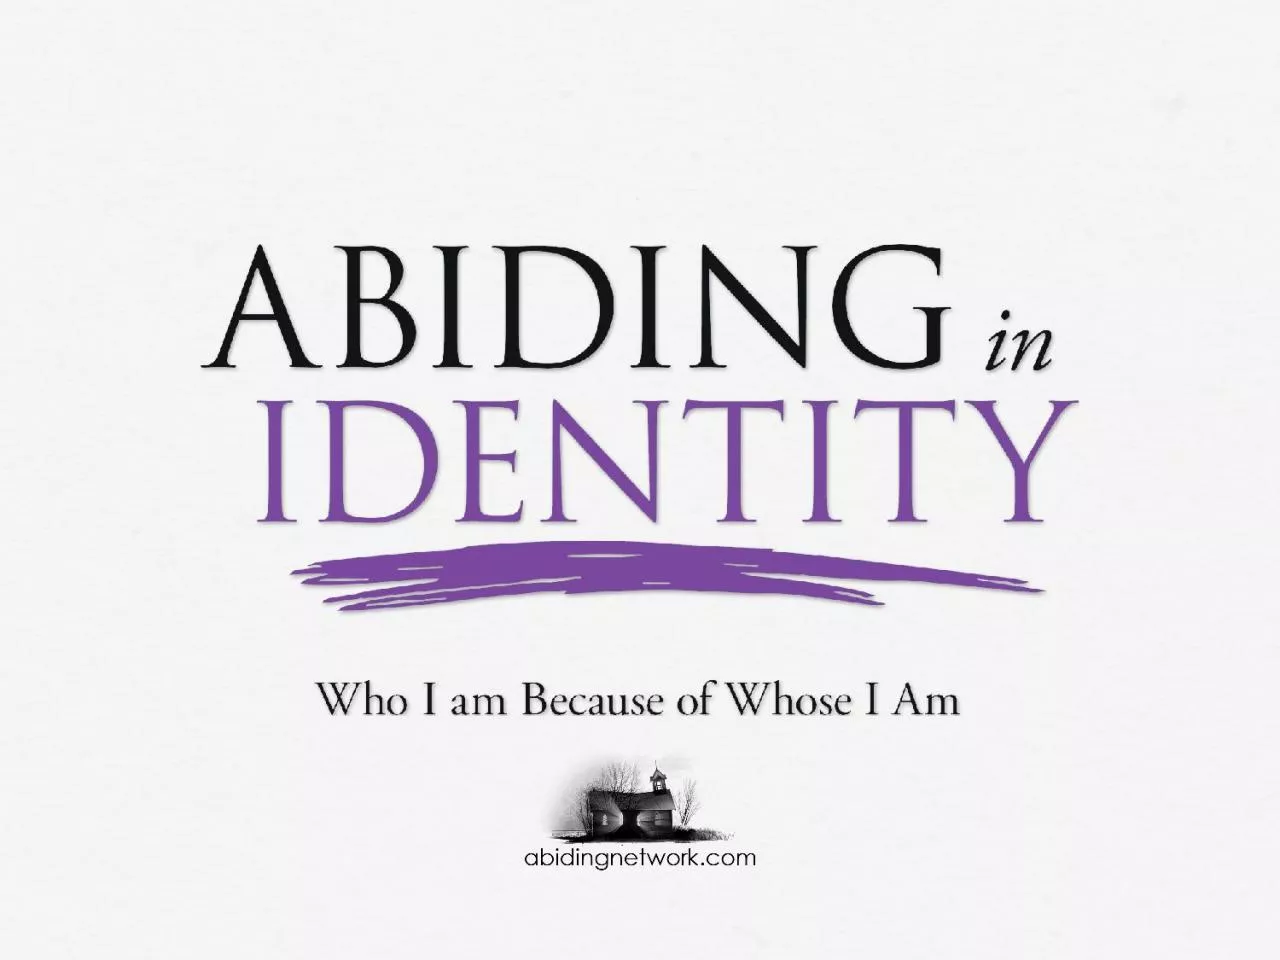 Session 3: Identity without Christ vs. Identity in Christ